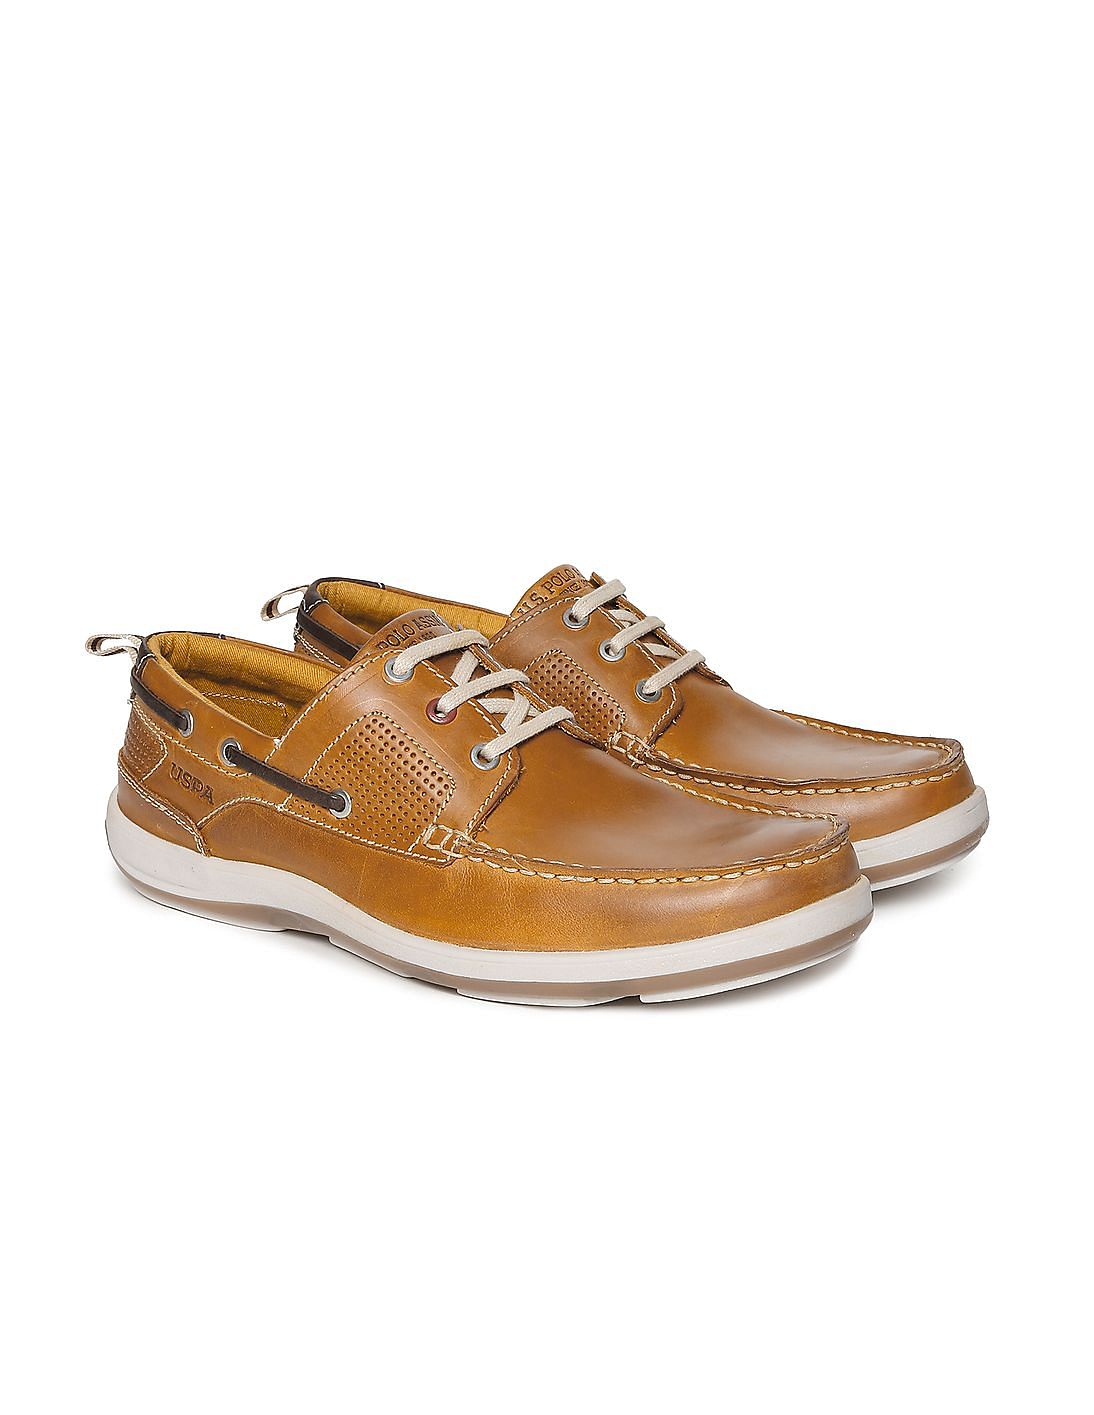 Buy U.S. Polo Assn. Perforated Leather Marshell Boat Shoes - NNNOW.com